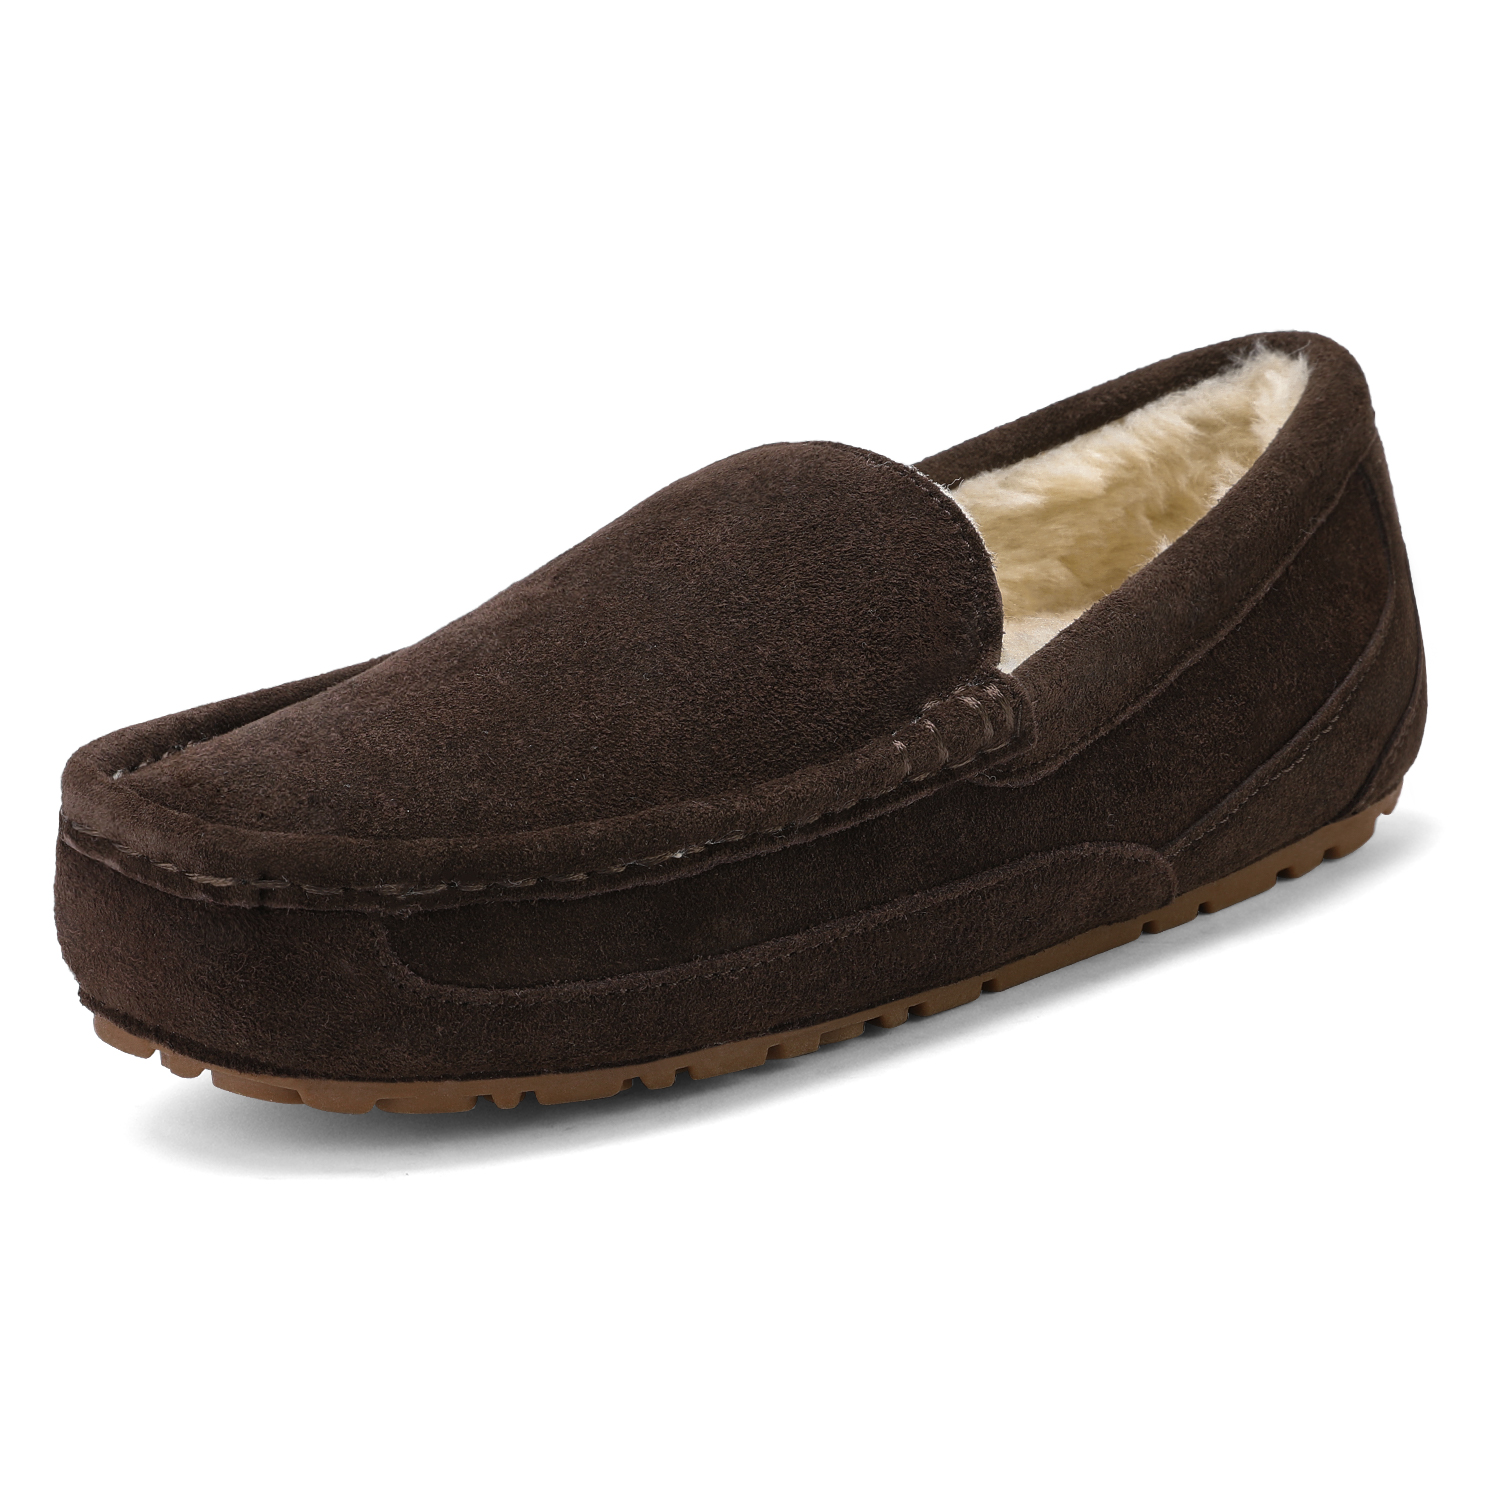 Dream Pairs New Soft Mens Au-Loafer Indoor Warm Moccasins Slippers Flats Shoes Au-Loafer-01 Brown Size 8 - image 1 of 4